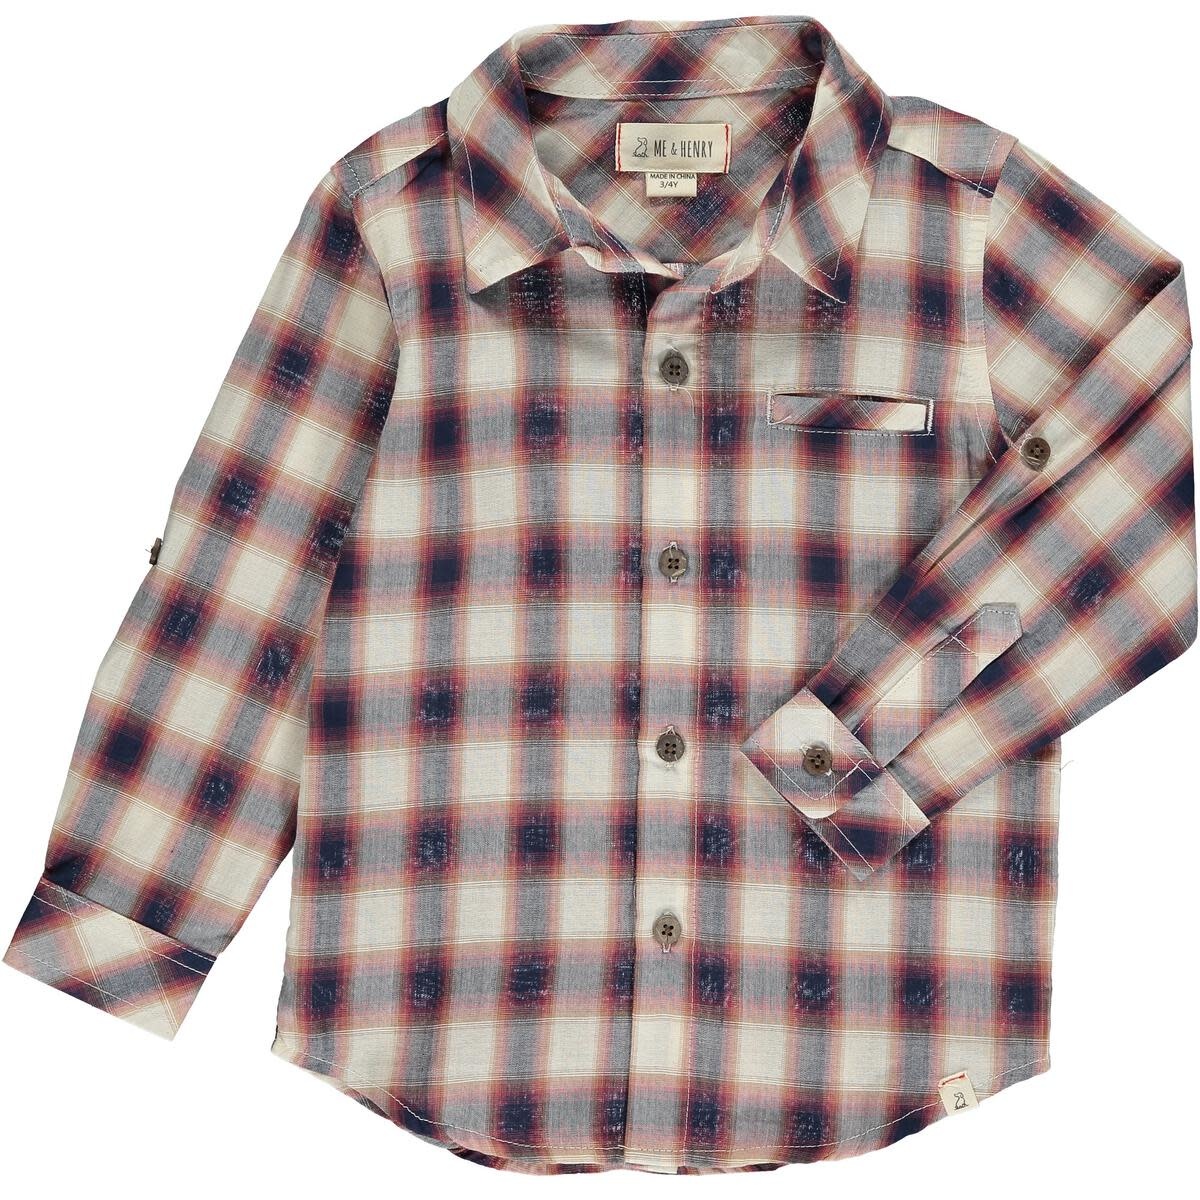 Me & Henry Boy  L/S Woven Collared Shirt